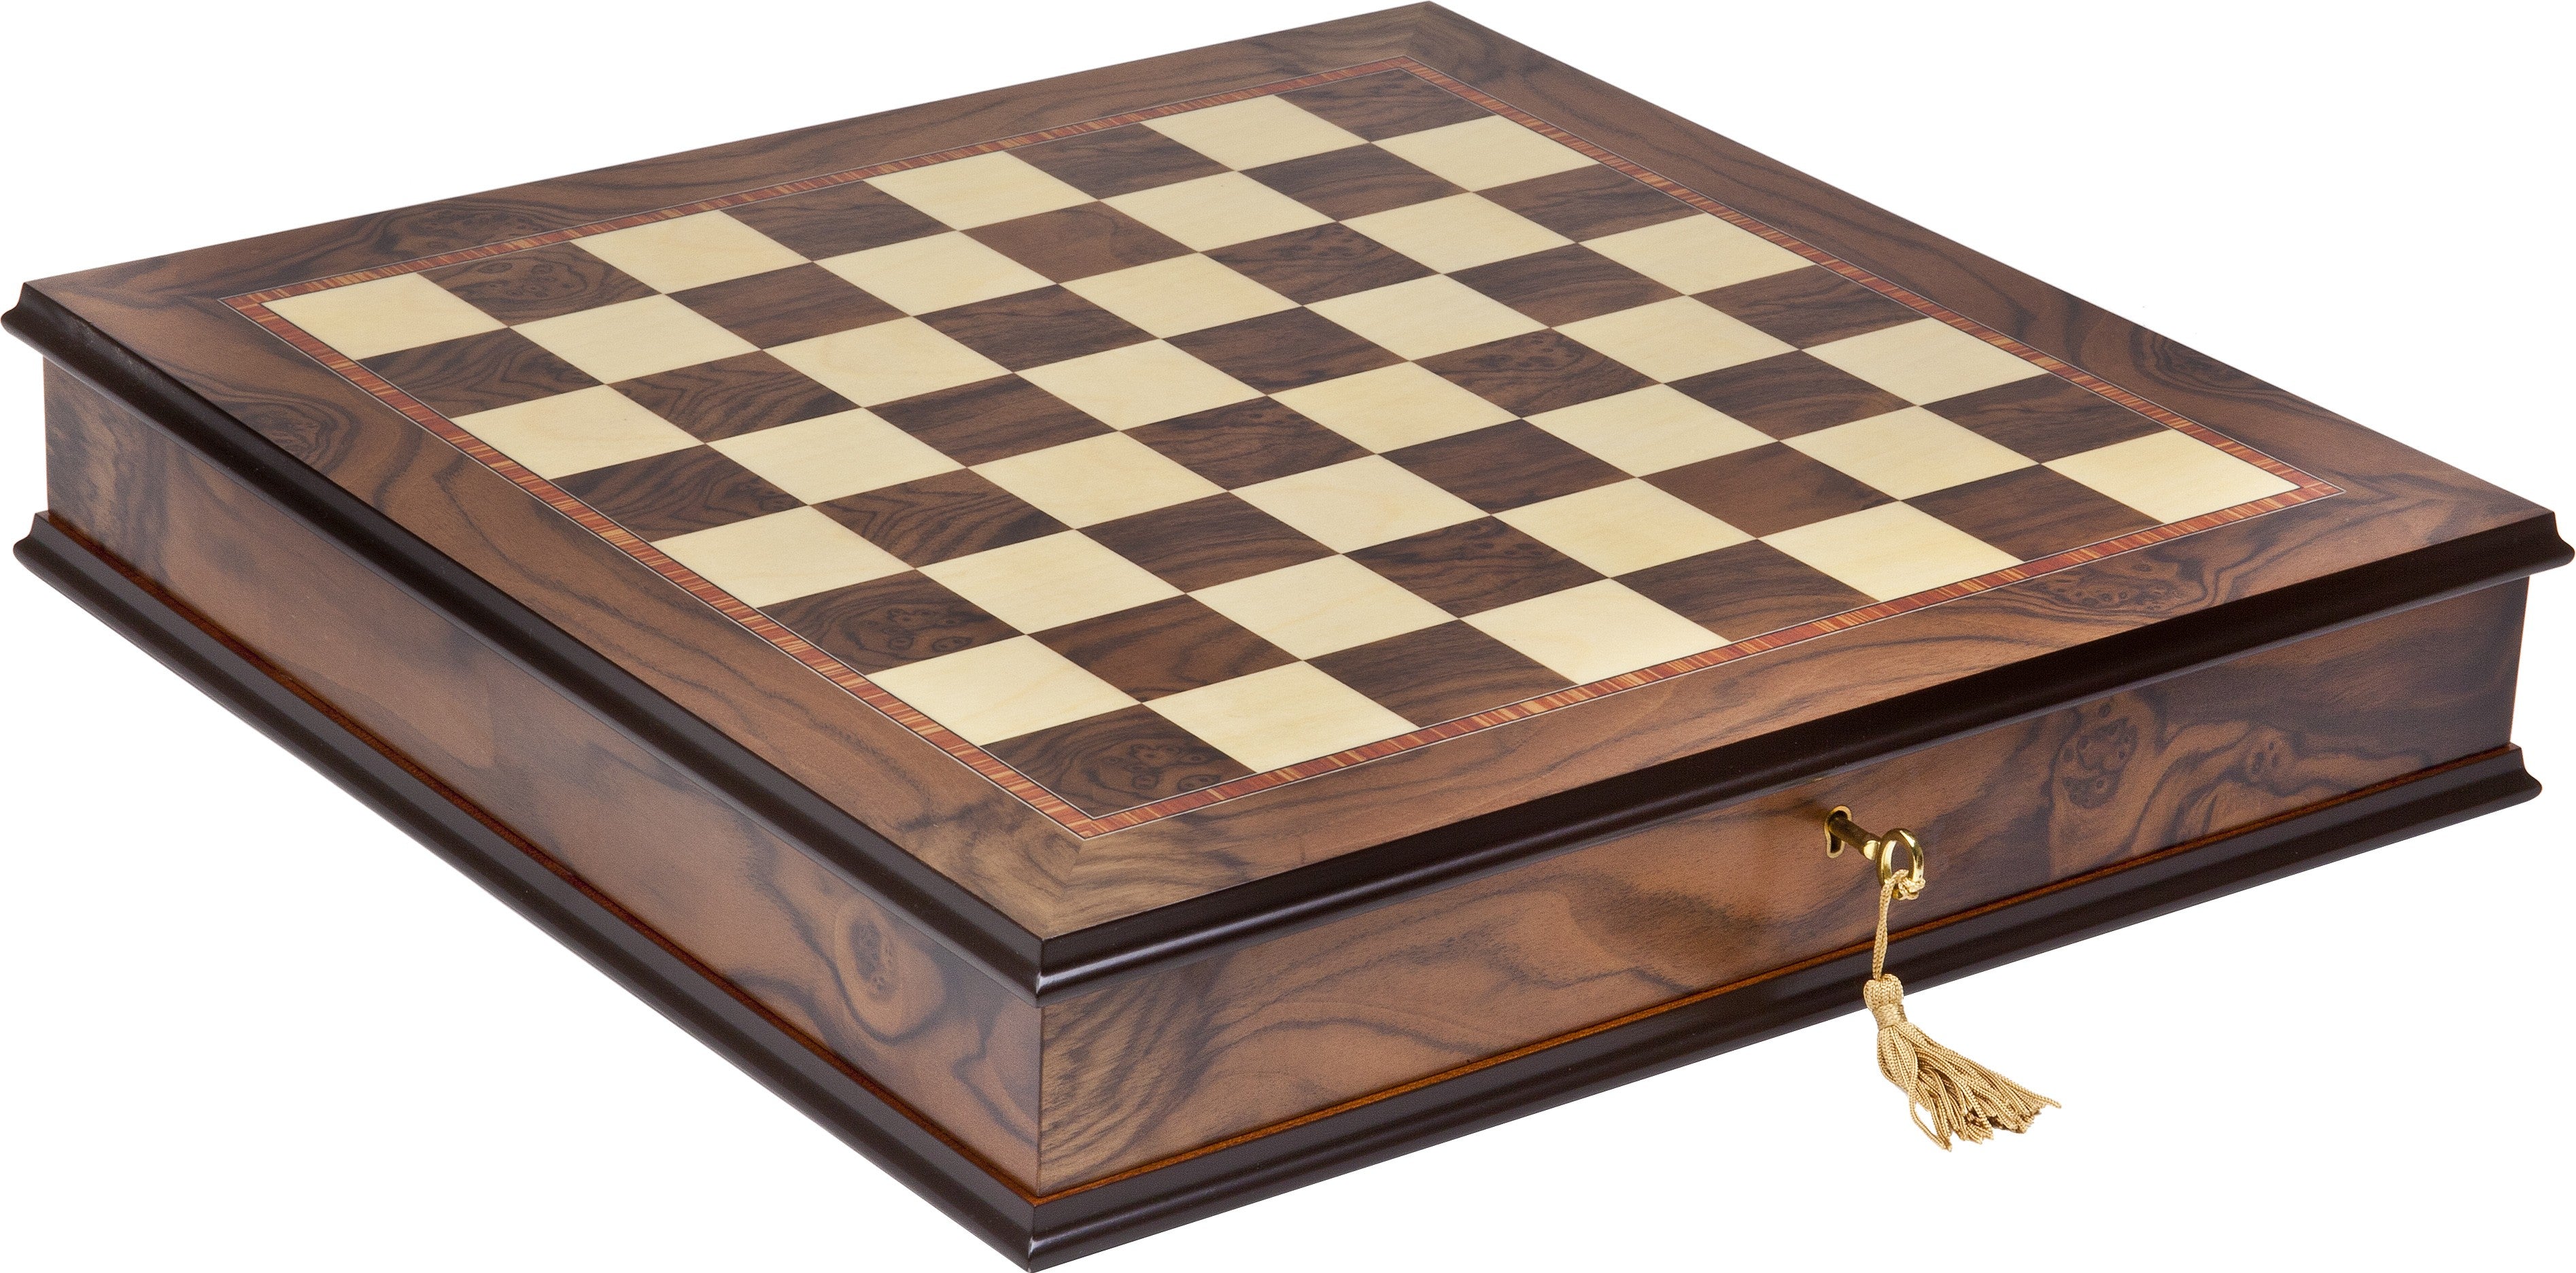 French Staunton Chessmen & The Ultimate Chess Board/Cabinet